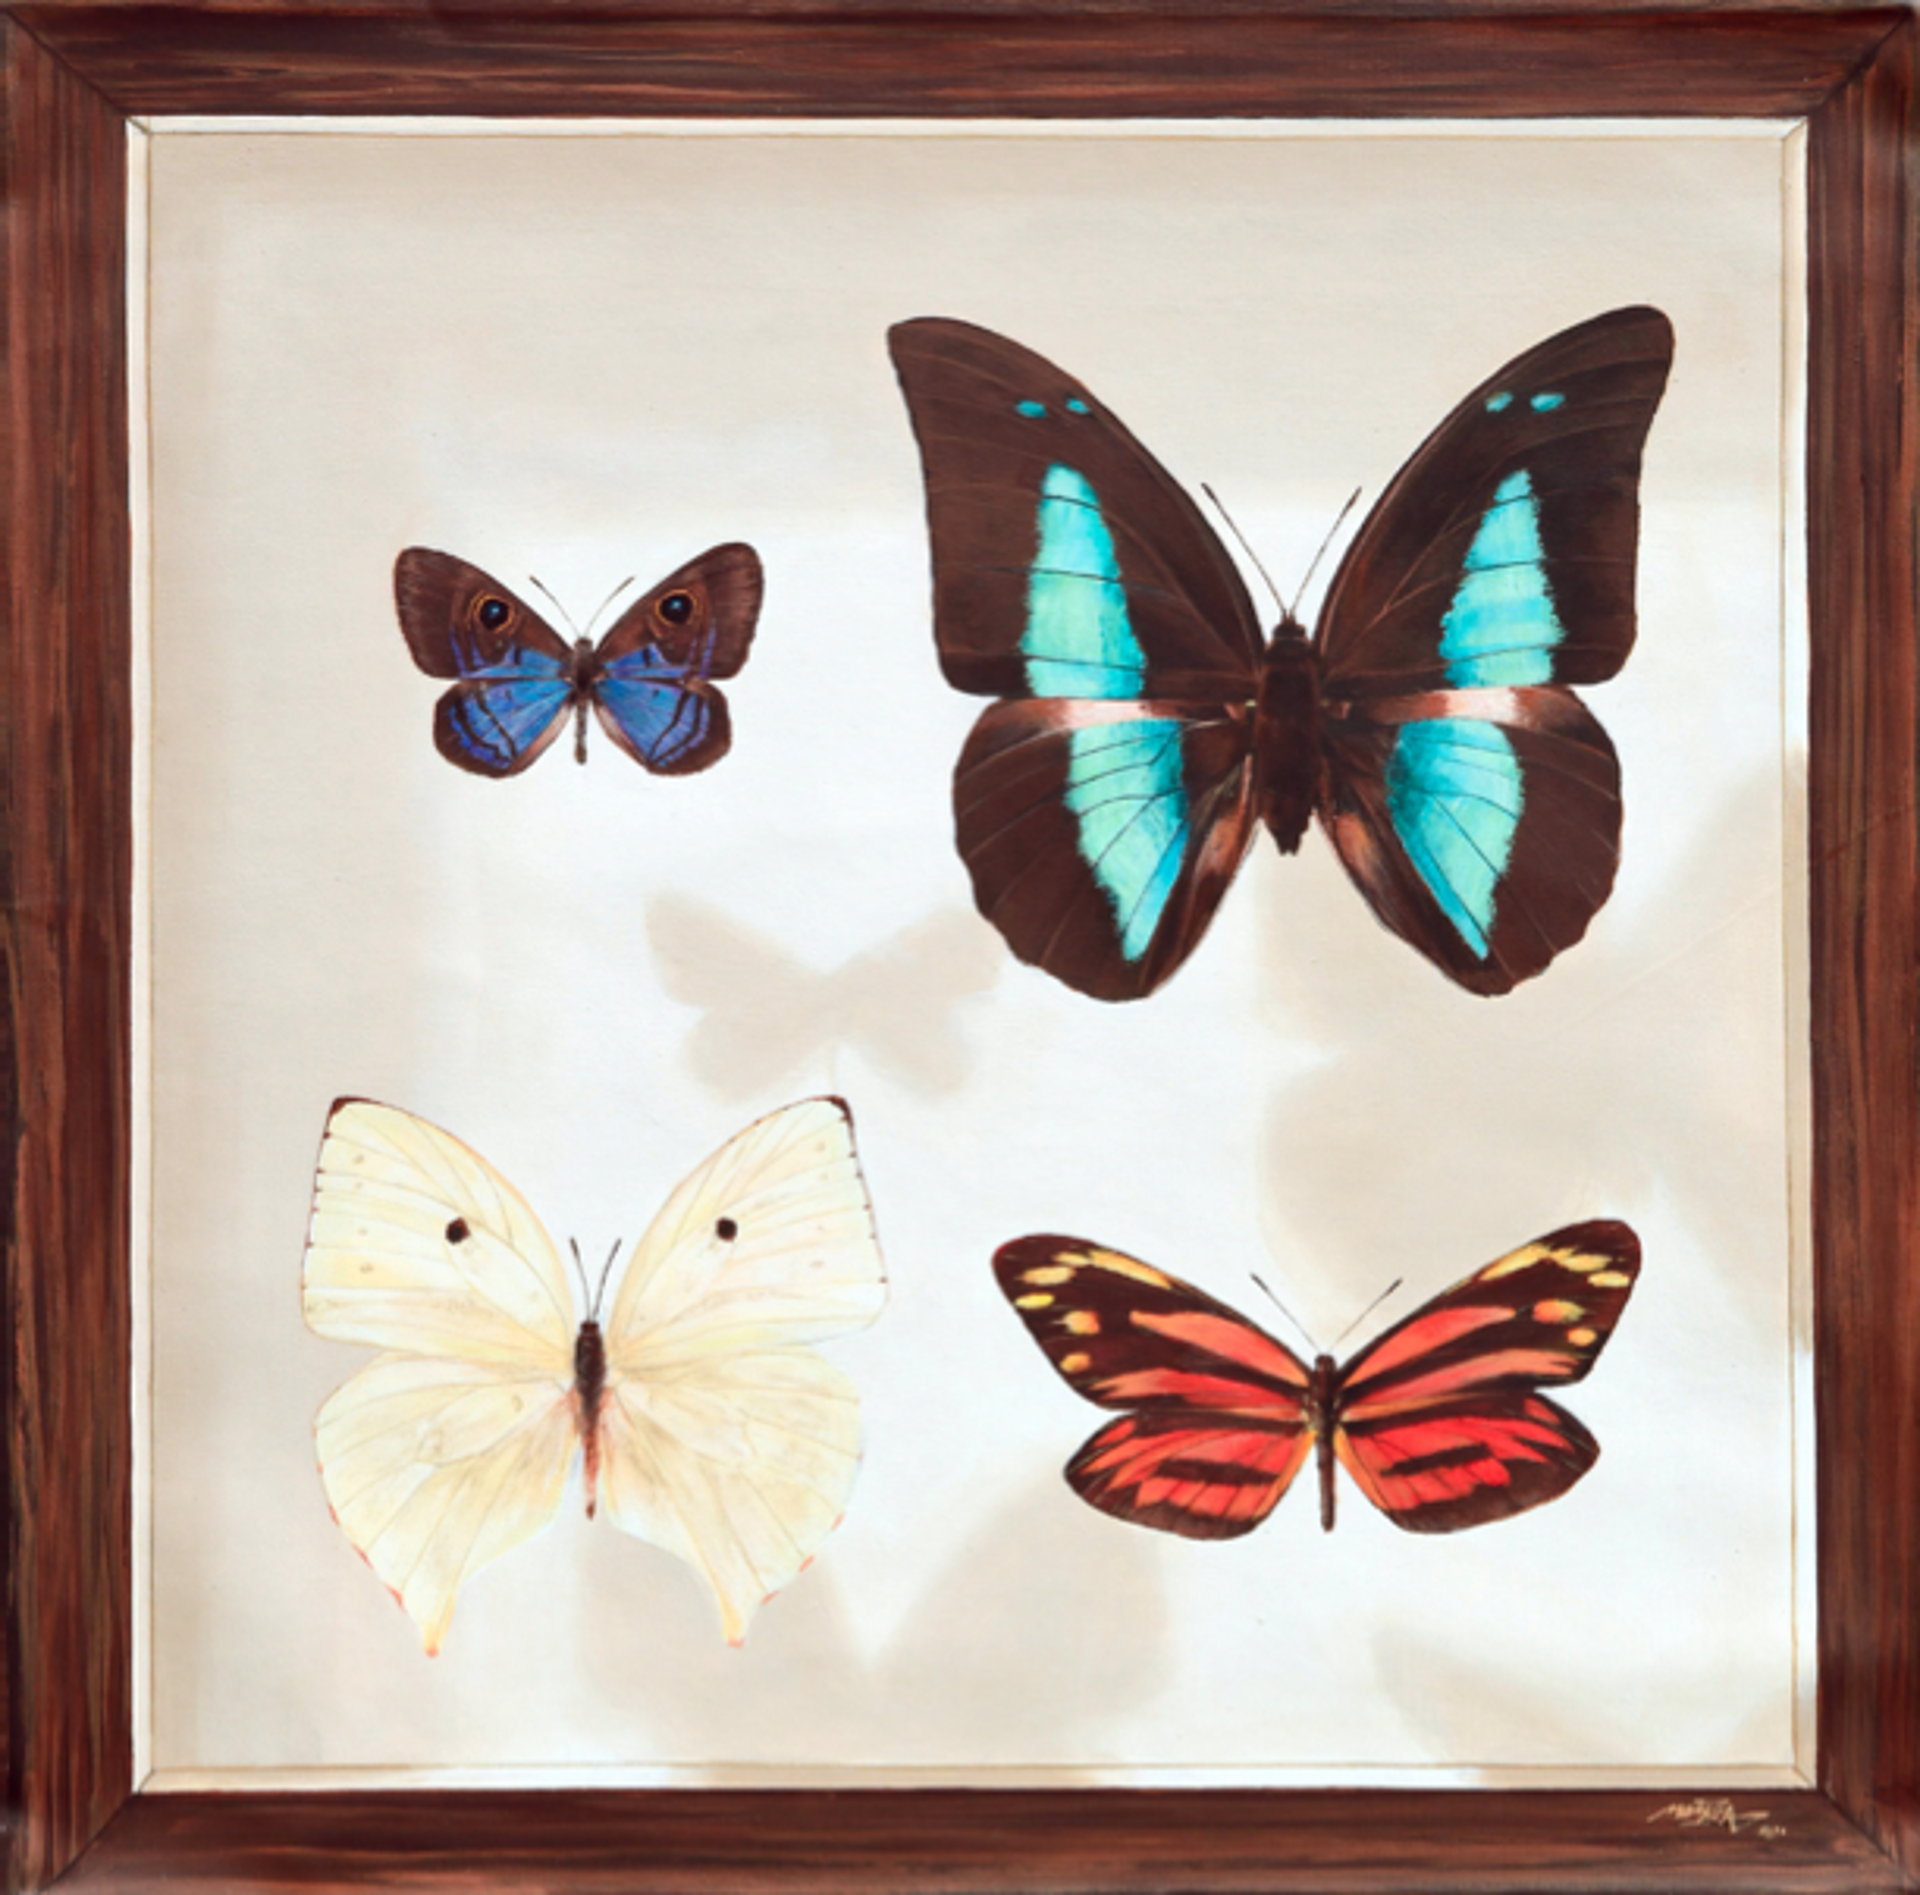 Butterflies of Mexico - Board 3 by Mantra